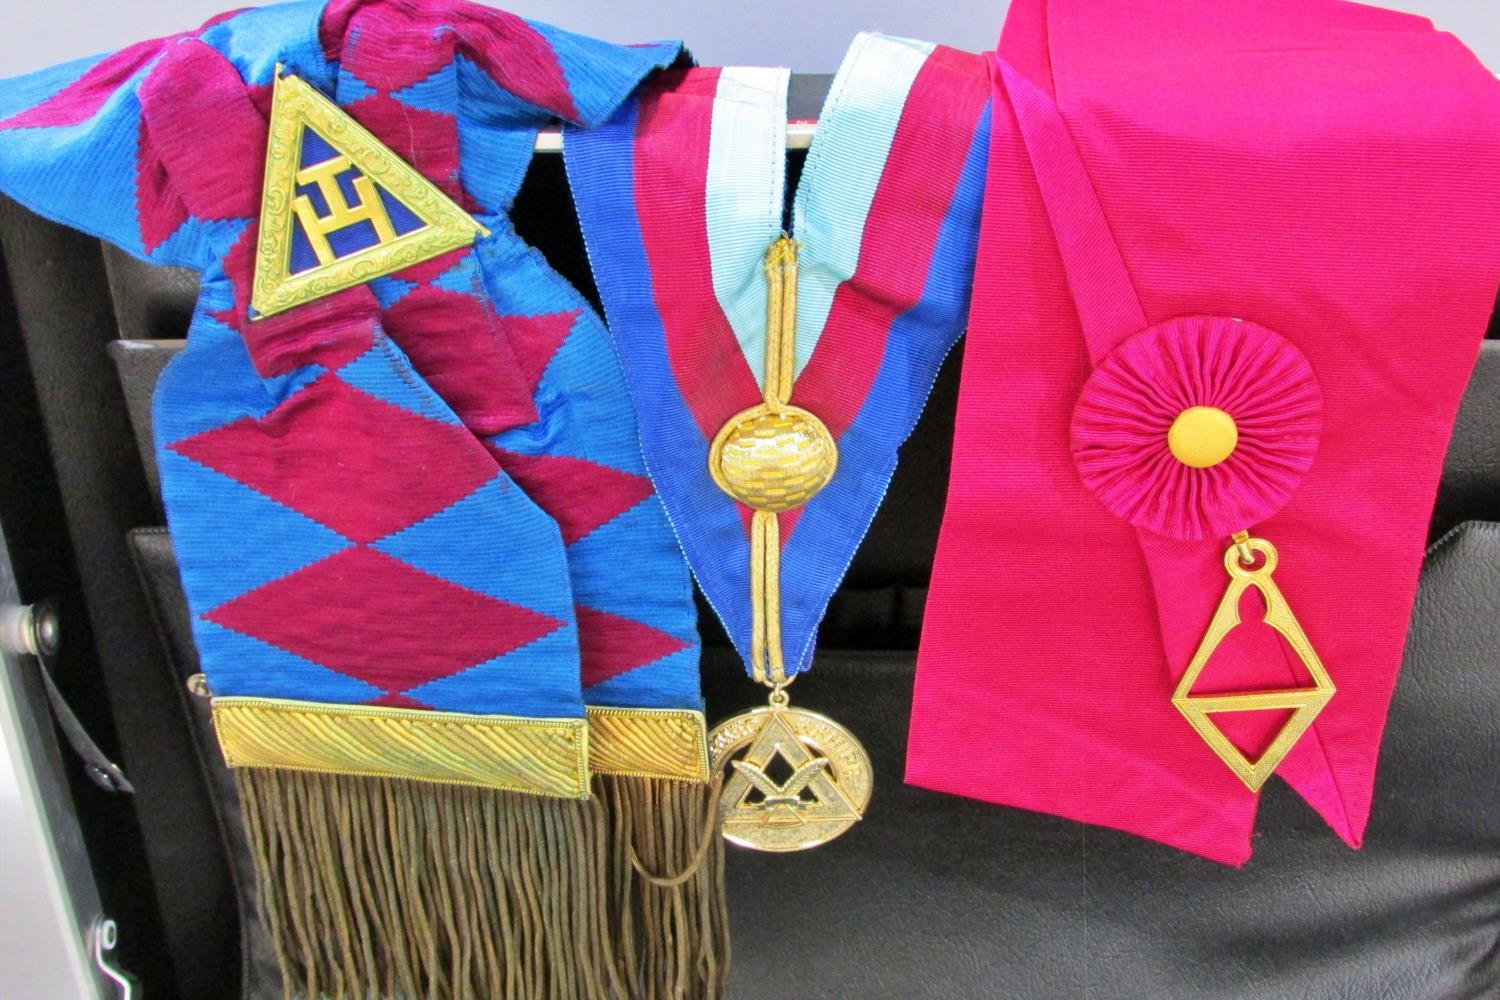 Masonic Regalia of several sashes or varying patterns, some decorated with medallions and gold braid - Image 2 of 4